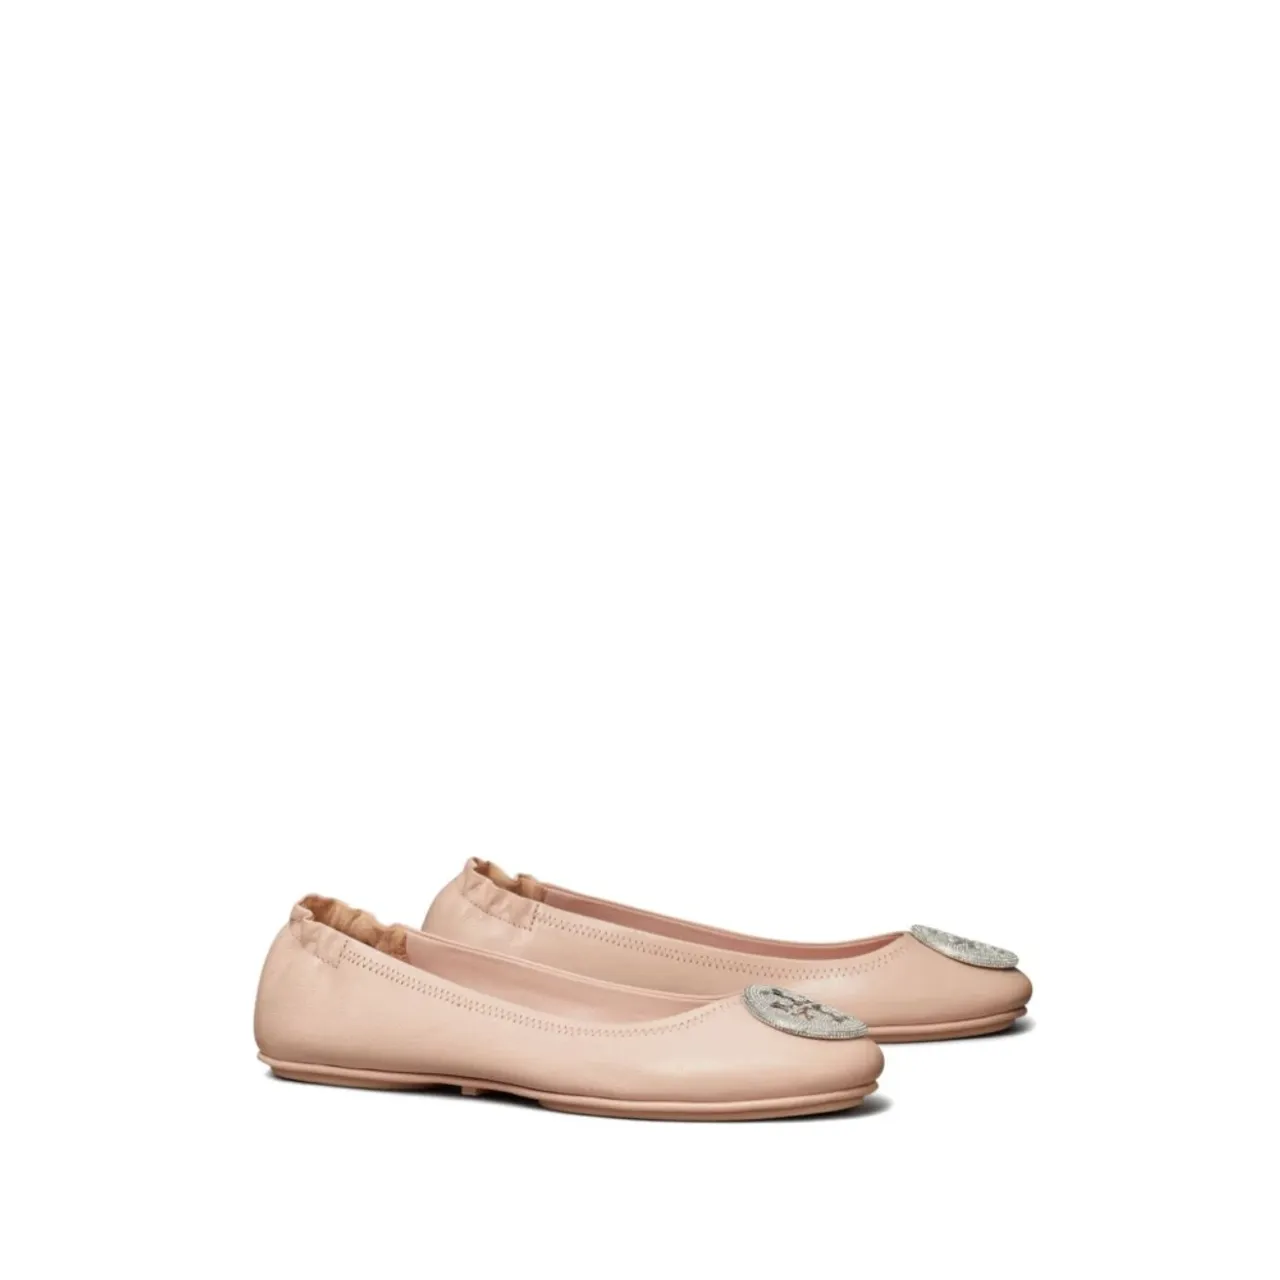 Tory Burch , Beige Leather Flats with Crystal Embellishment ,Pink female, Sizes: